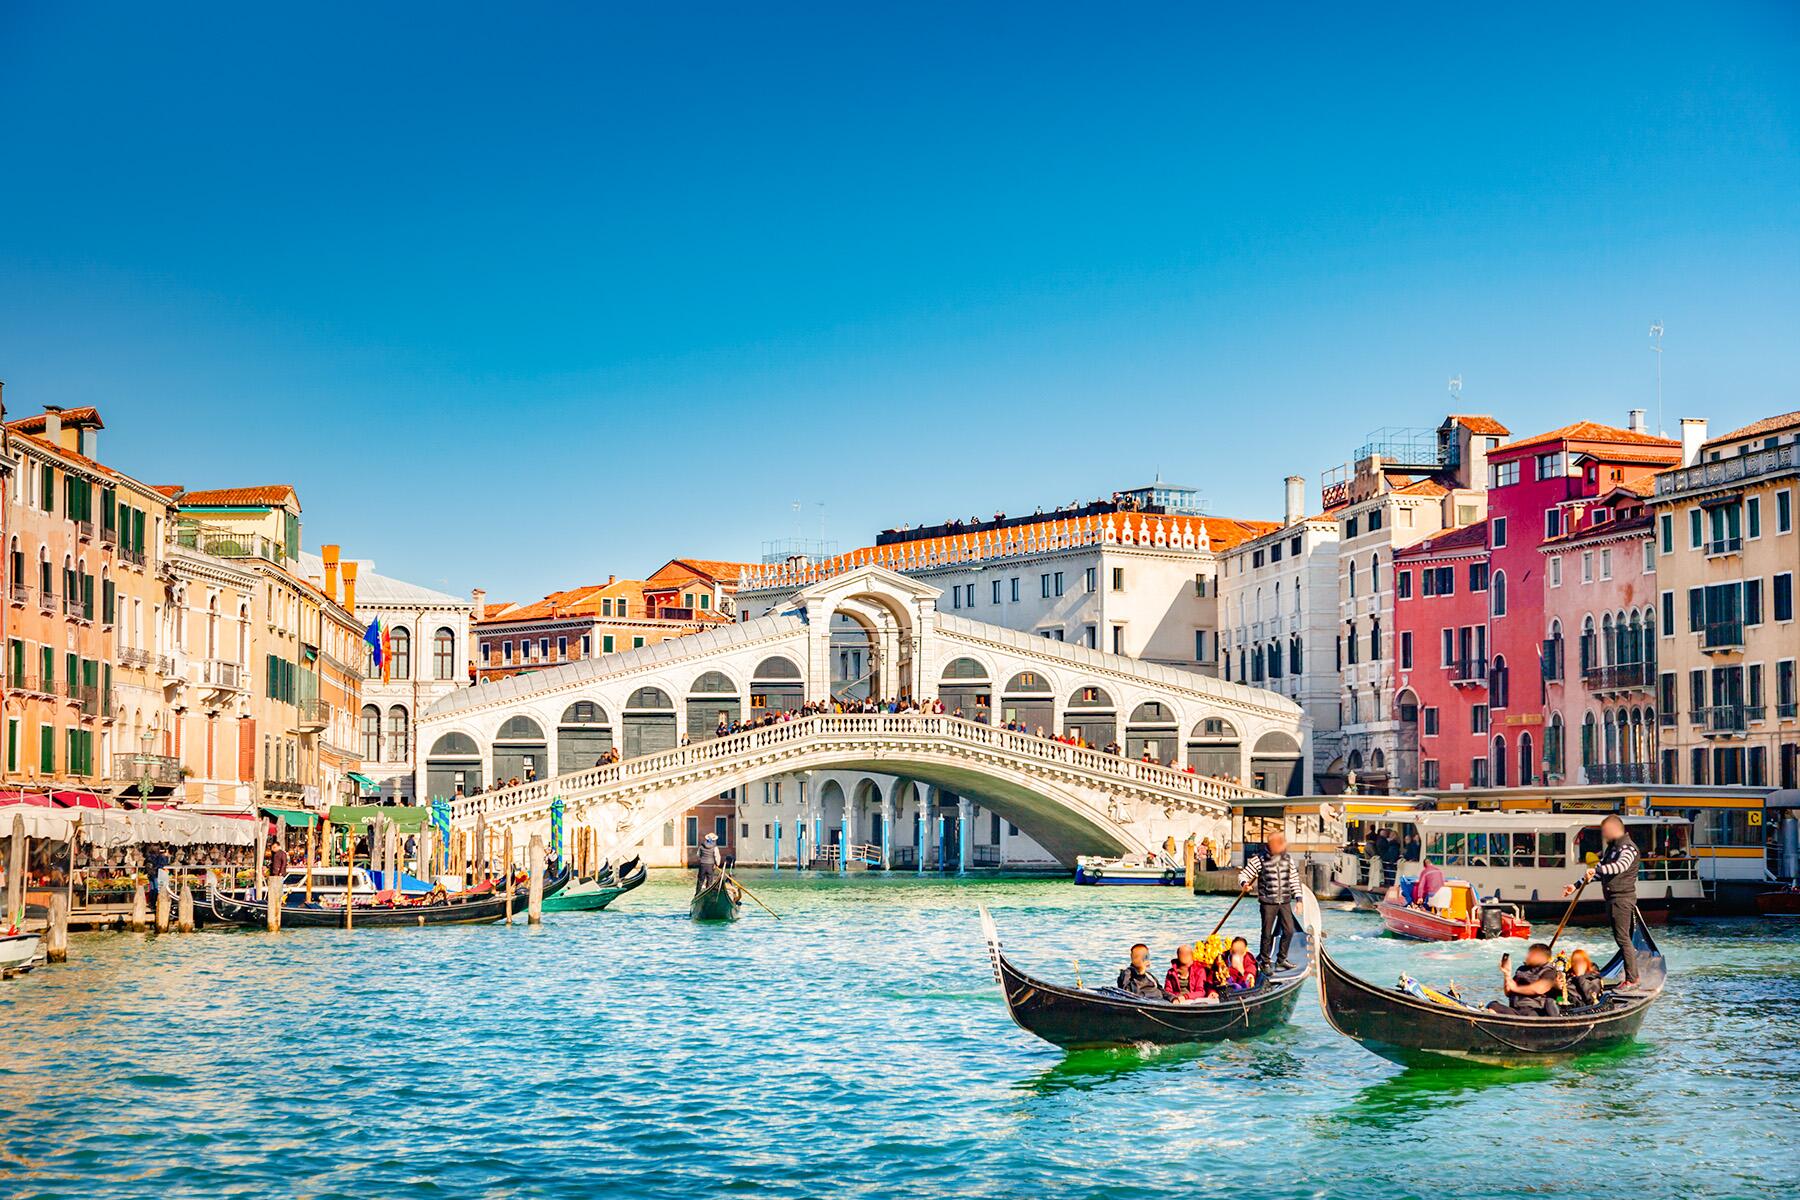 Locals Guide to Venice, Italy